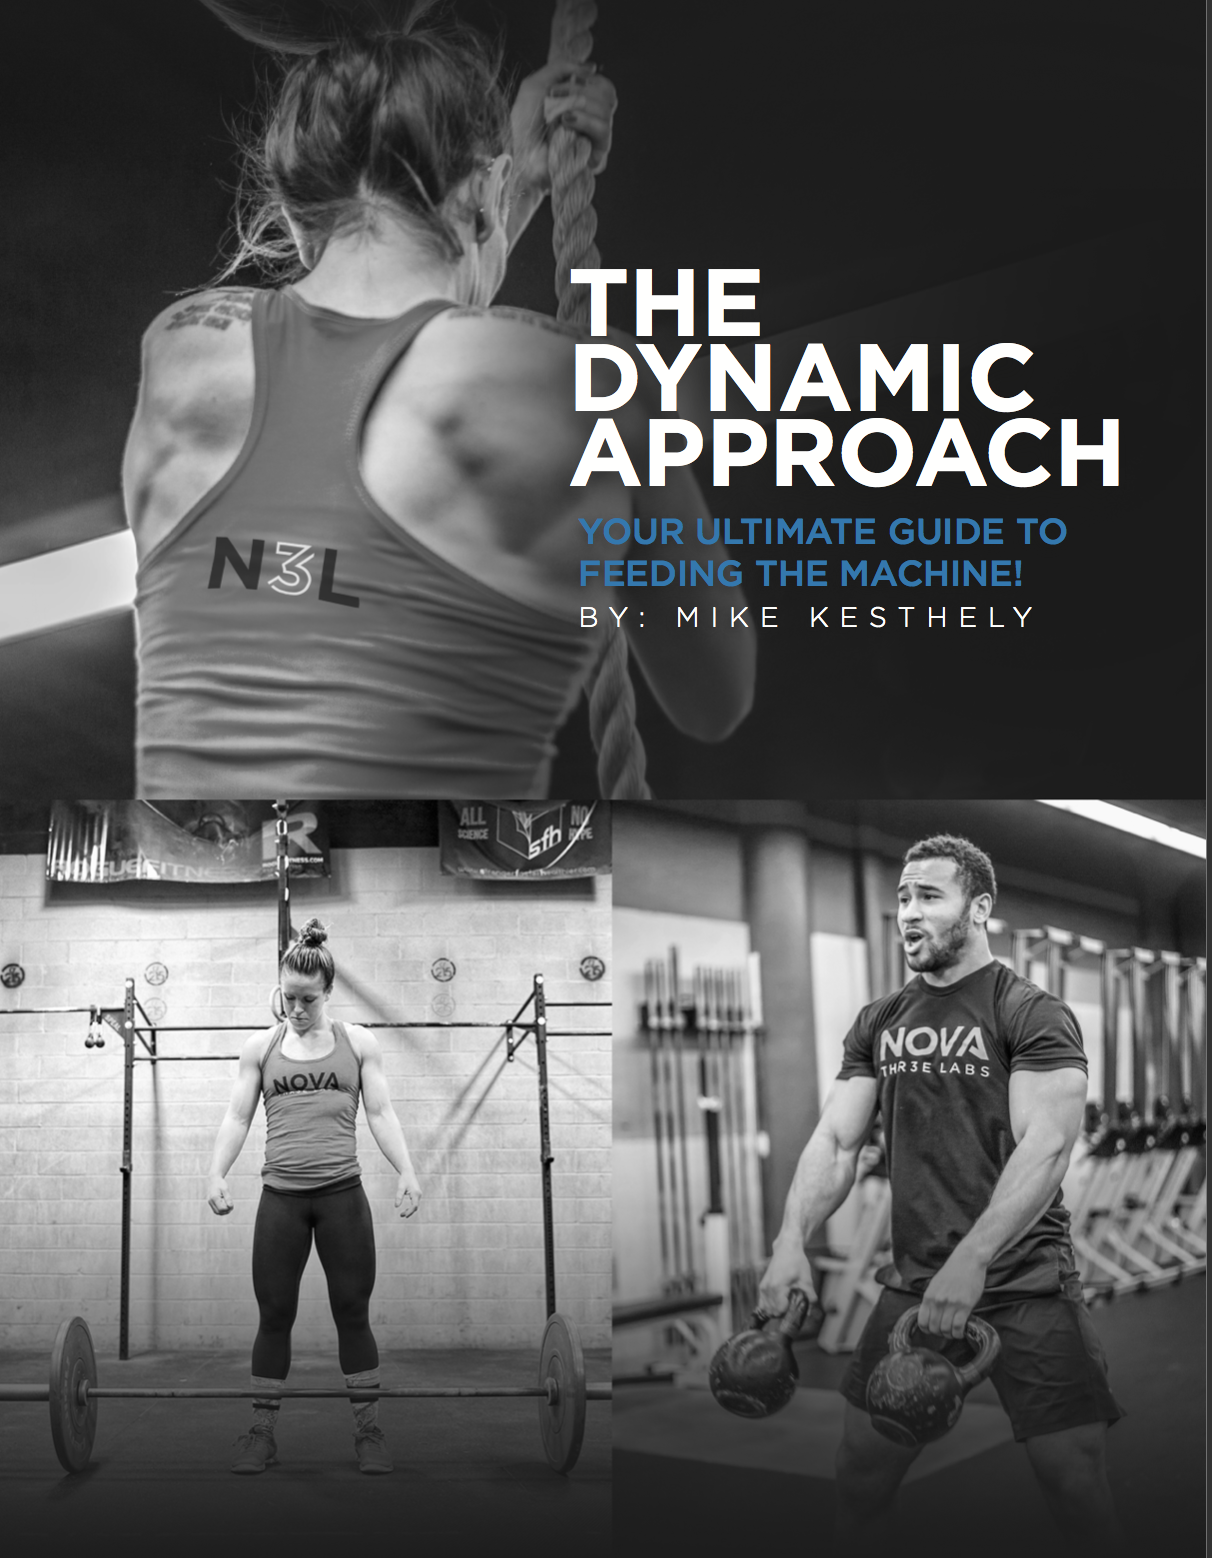 The Dynamic Approach: Your ultimate guide to Feeding the Machine E-book!